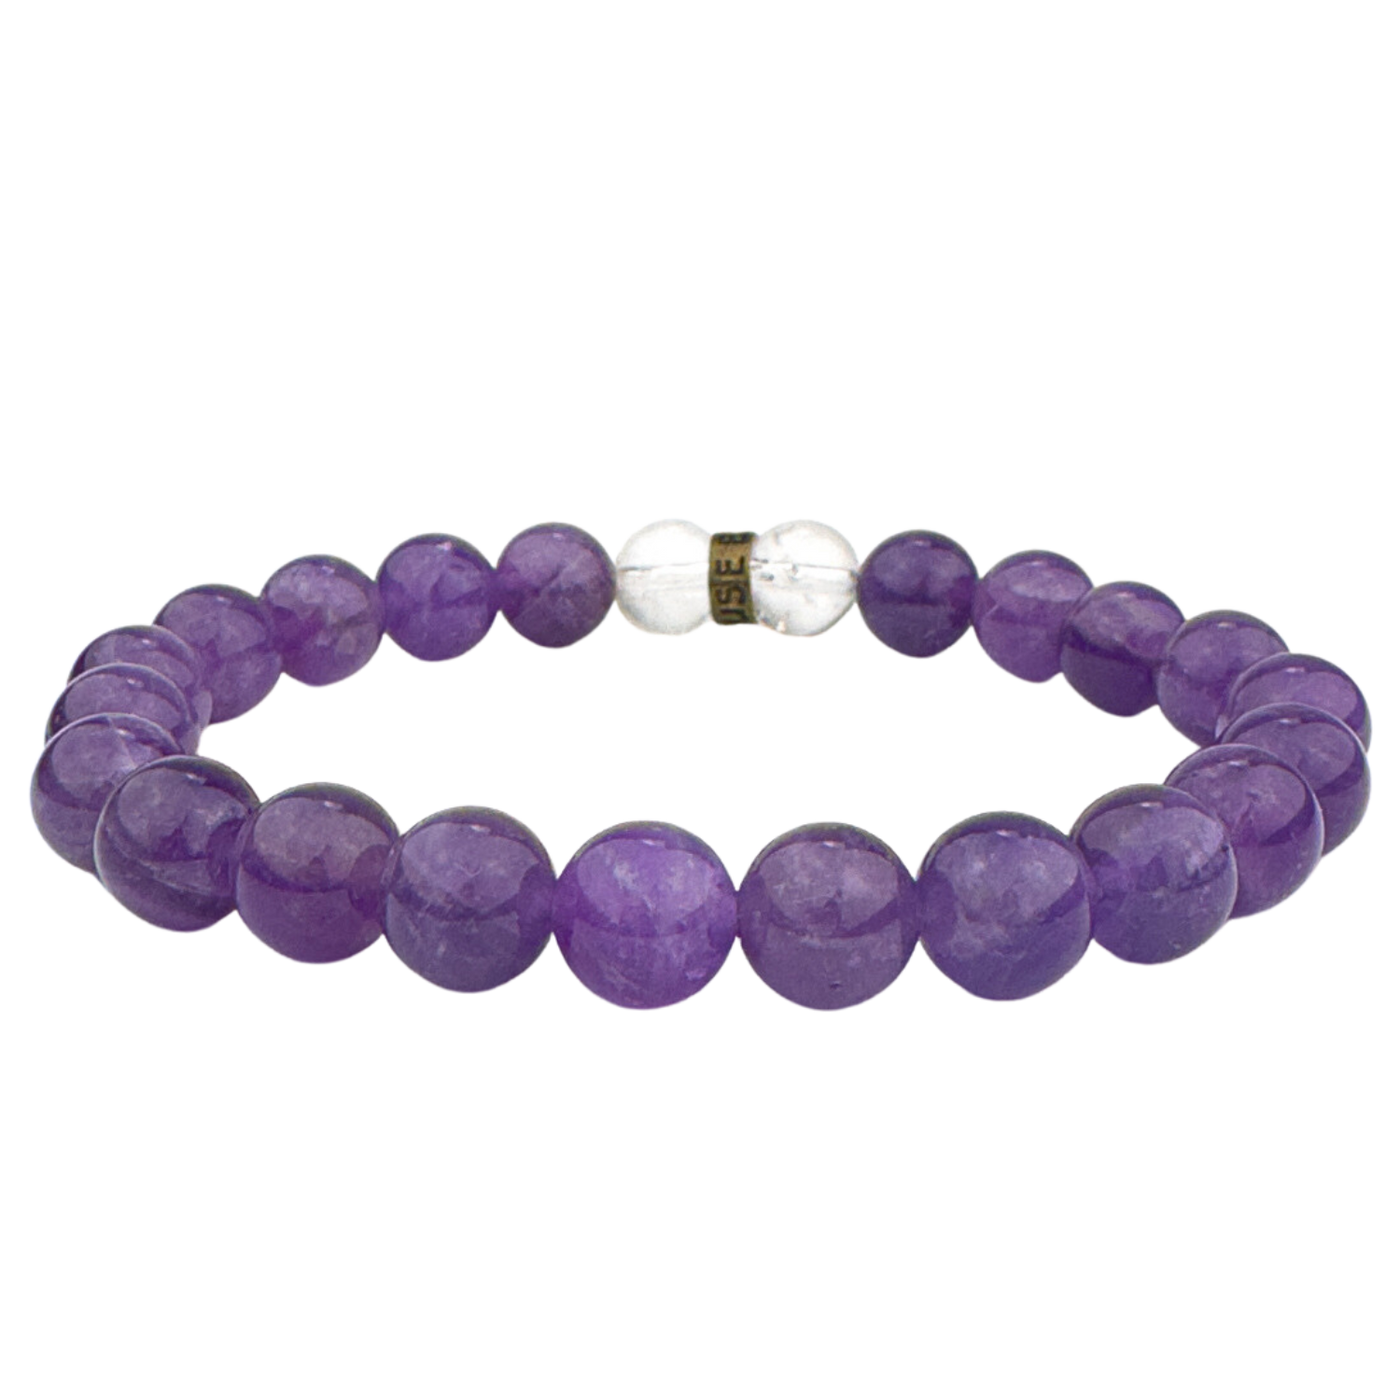 product view of genuine Amethyst crystal bead stretch bracelet by Energy Muse